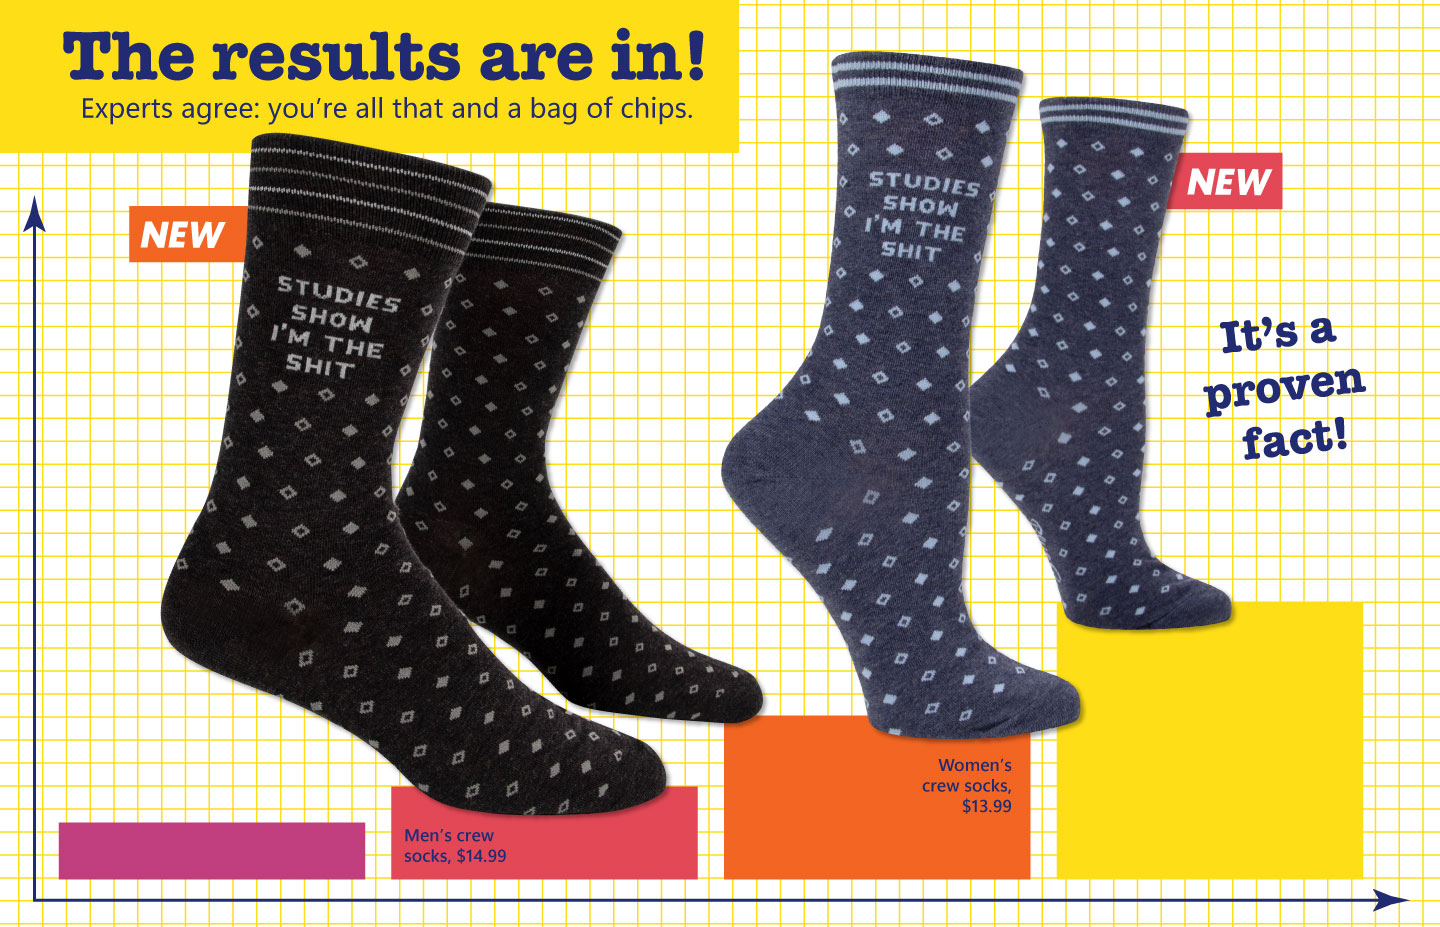 Studies recommend socks. 9 out of 10 experts agree!